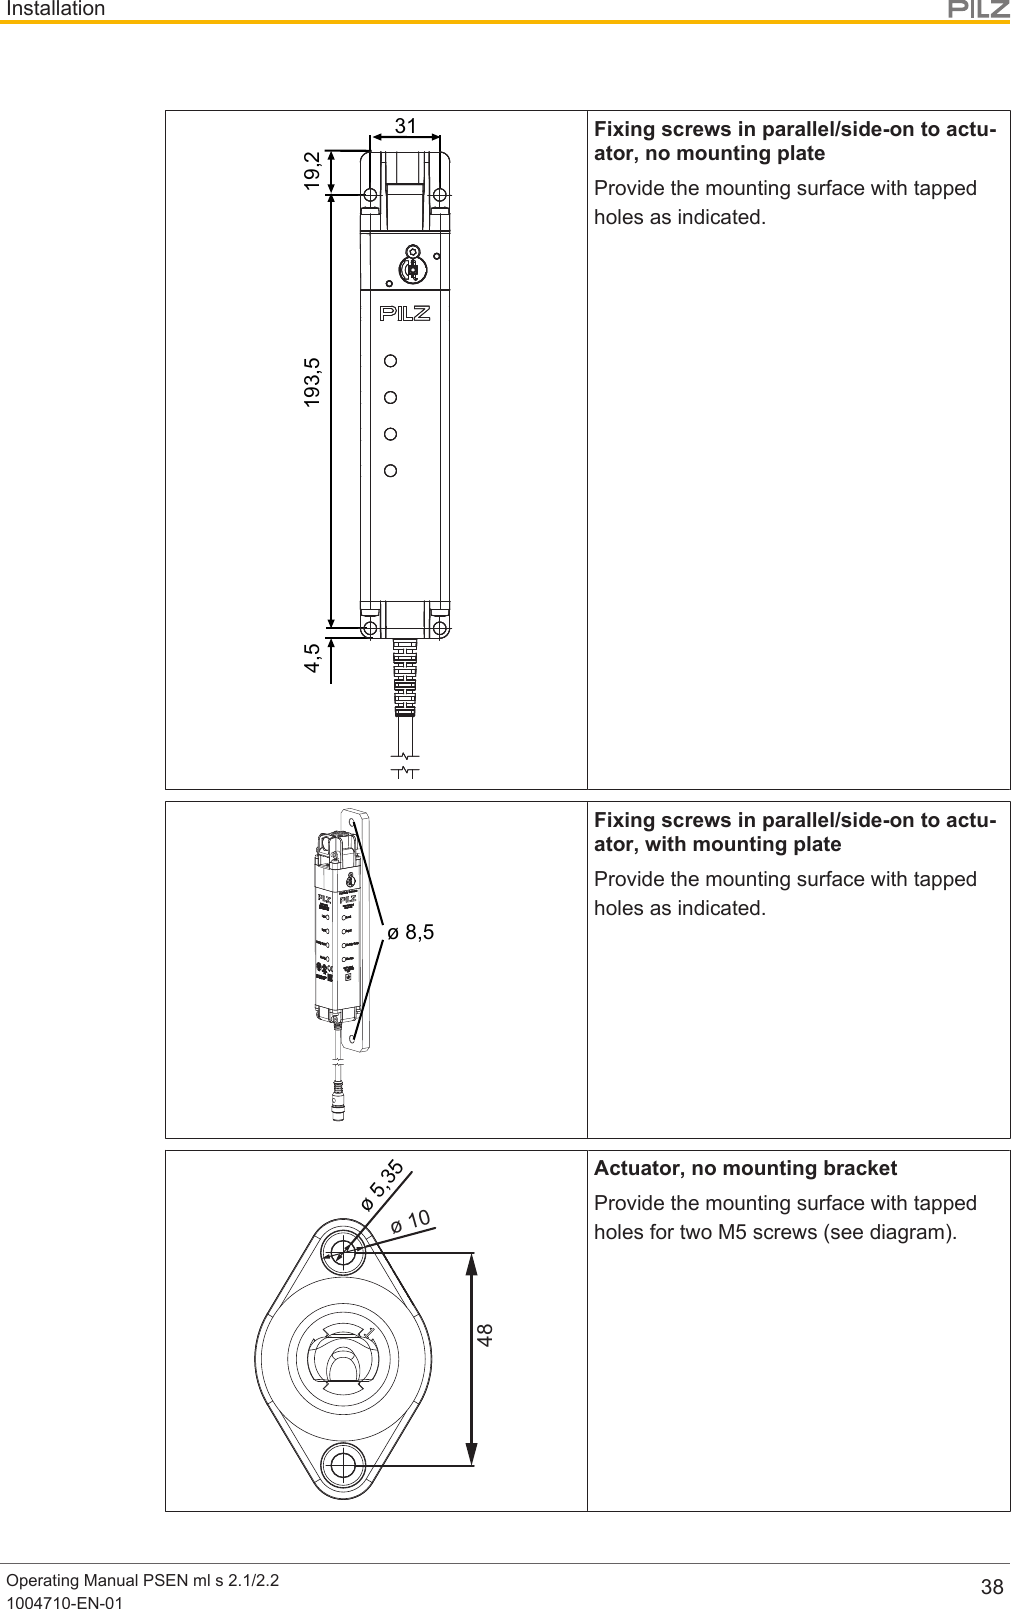 InstallationOperating Manual PSEN ml s 2.1/2.21004710-EN-01 383119,2193,54,5Fixing screws in parallel/side-on to actu-ator, no mounting plateProvide the mounting surface with tappedholes as indicated.ø 8,5Fixing screws in parallel/side-on to actu-ator, with mounting plateProvide the mounting surface with tappedholes as indicated.ø 5,35ø 1048Actuator, no mounting bracketProvide the mounting surface with tappedholes for two M5 screws (see diagram).